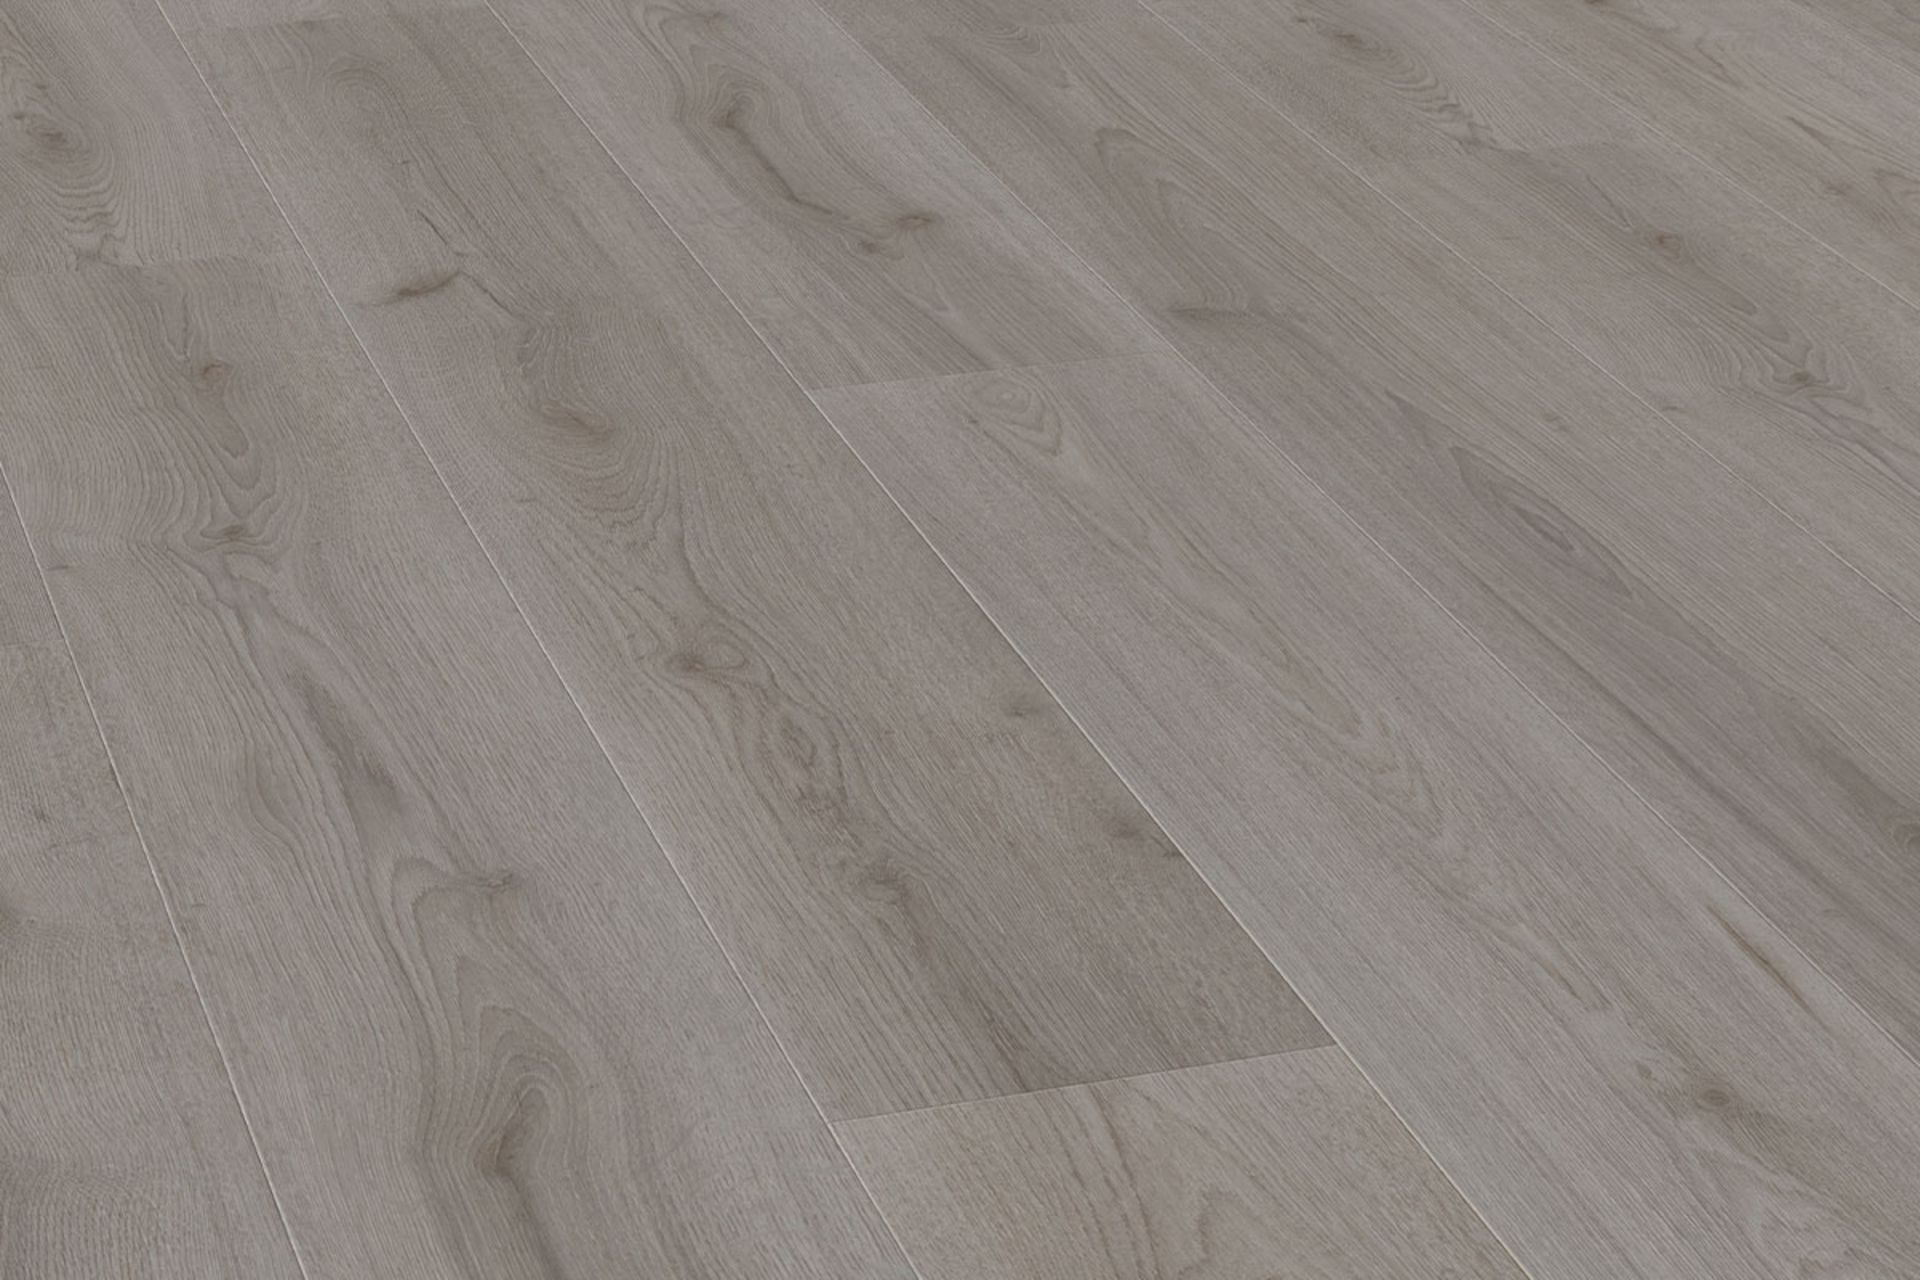 NEW 19.08m2 WILD DOVE OAK LAMINATE FLOORING . The elegant mid-grey hue of this floor complements any - Image 2 of 2